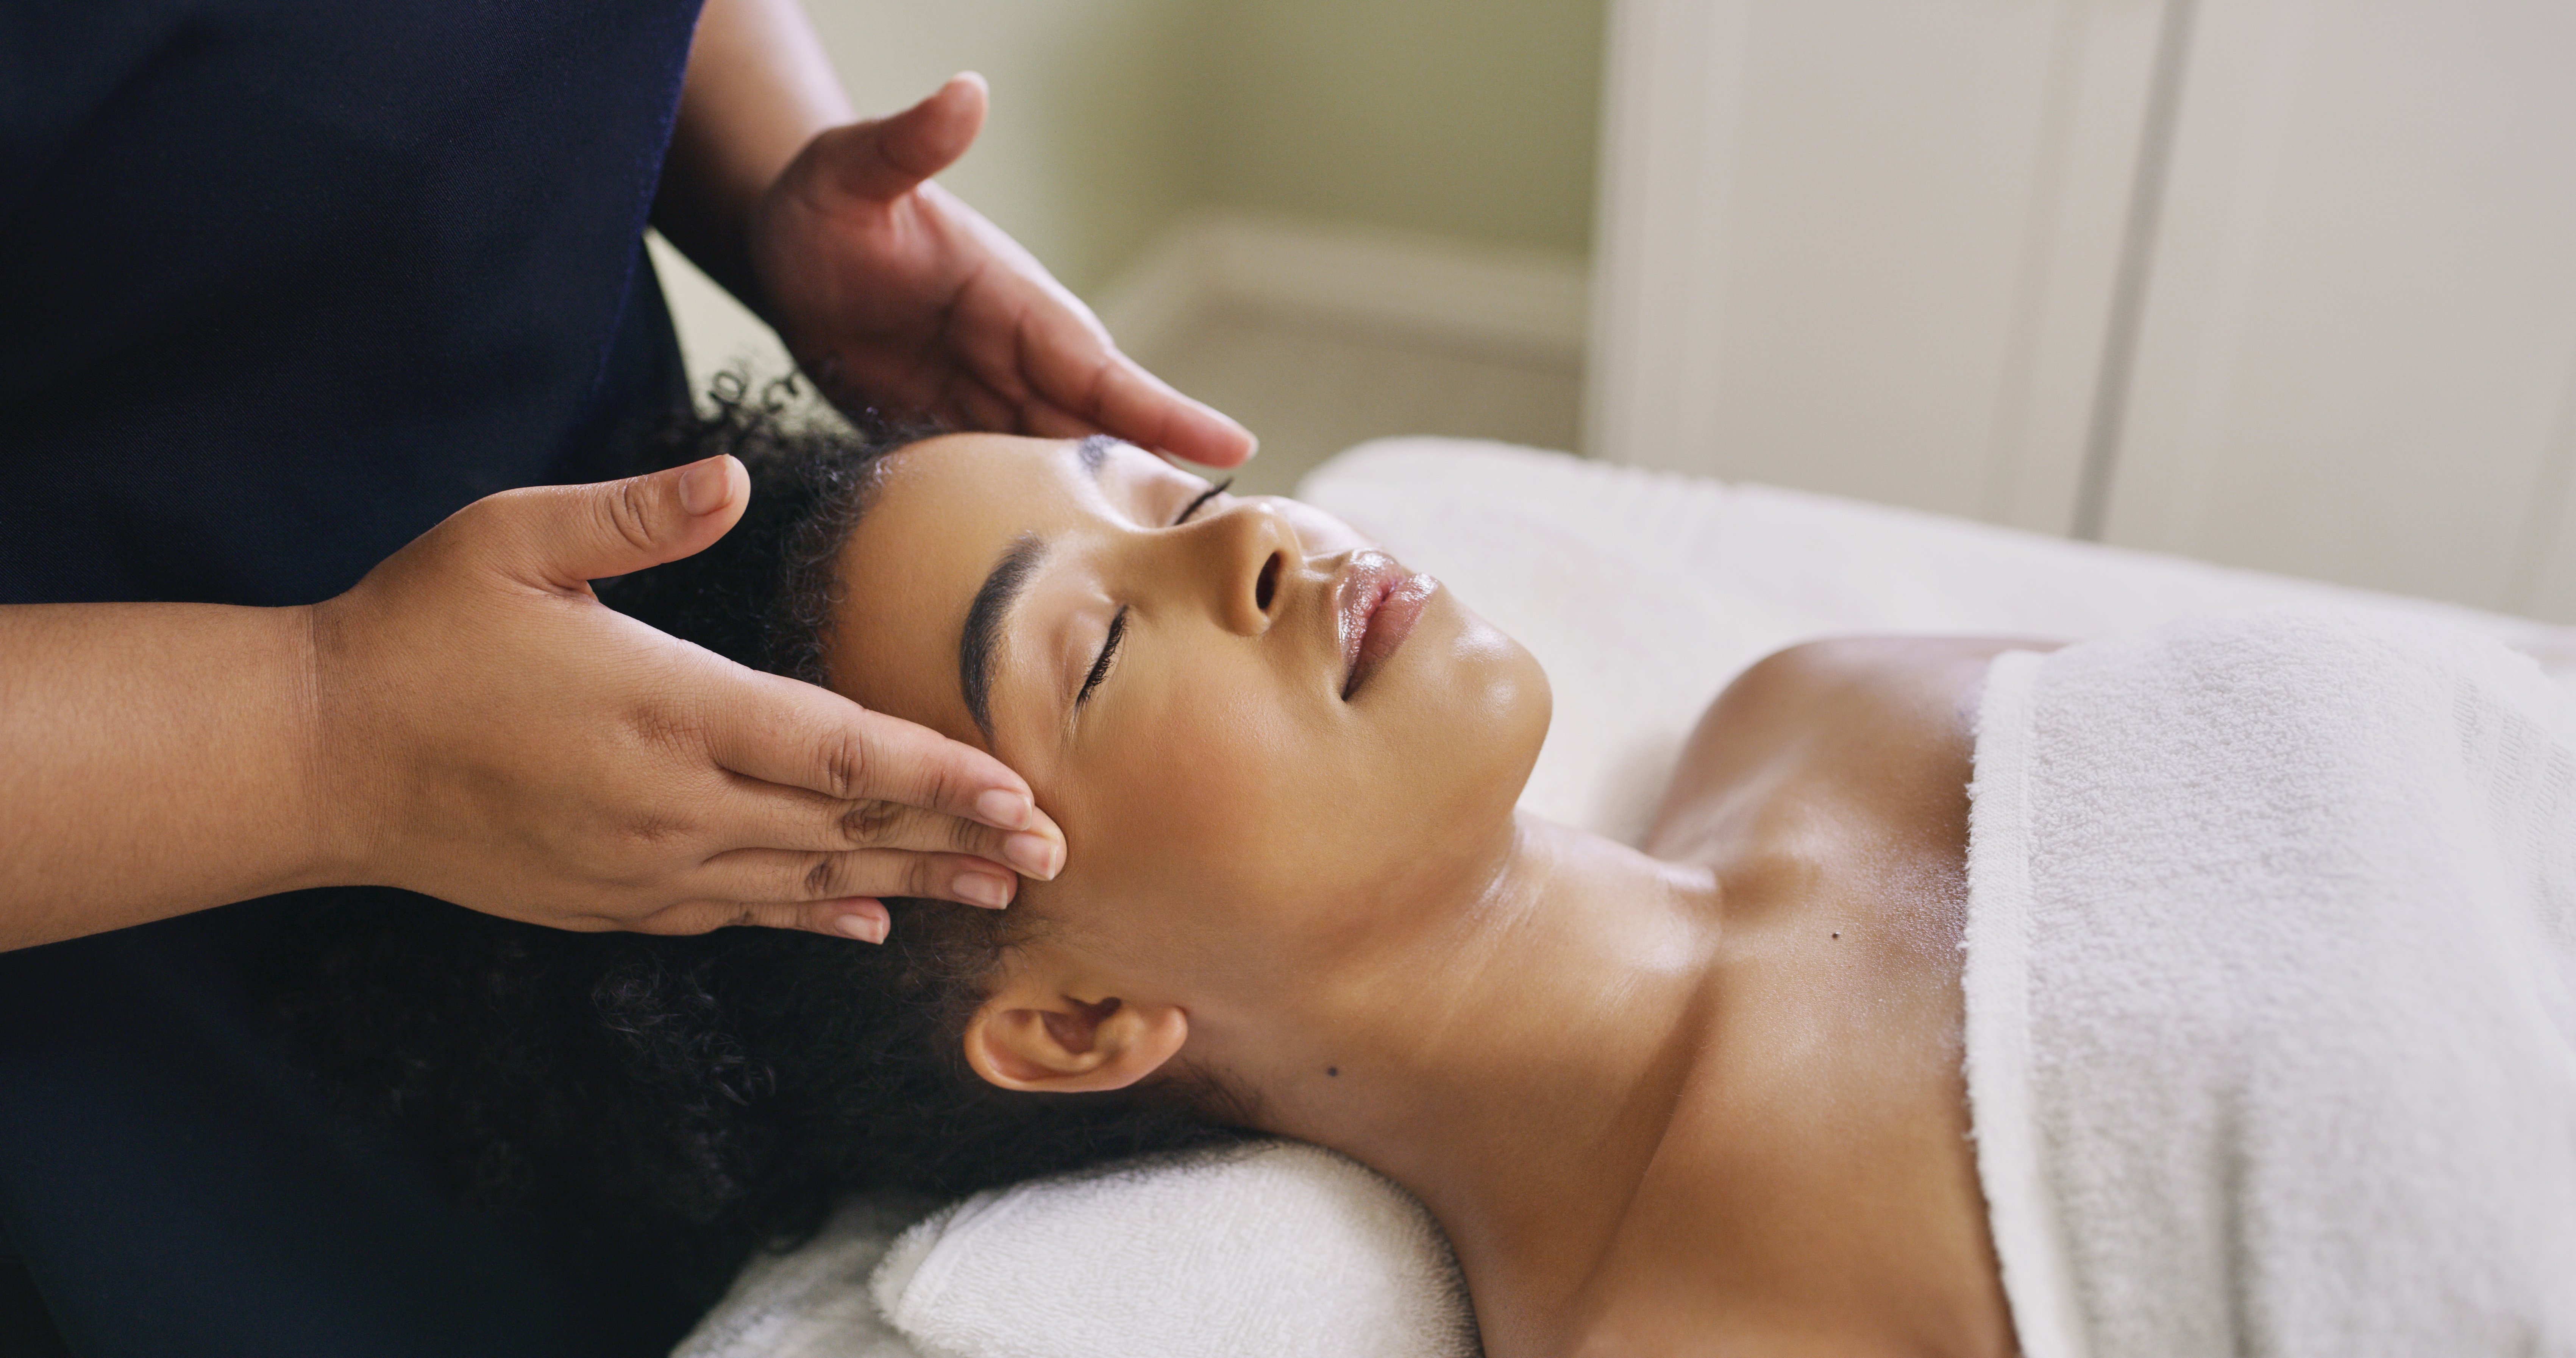 What are the risks of massage therapy?